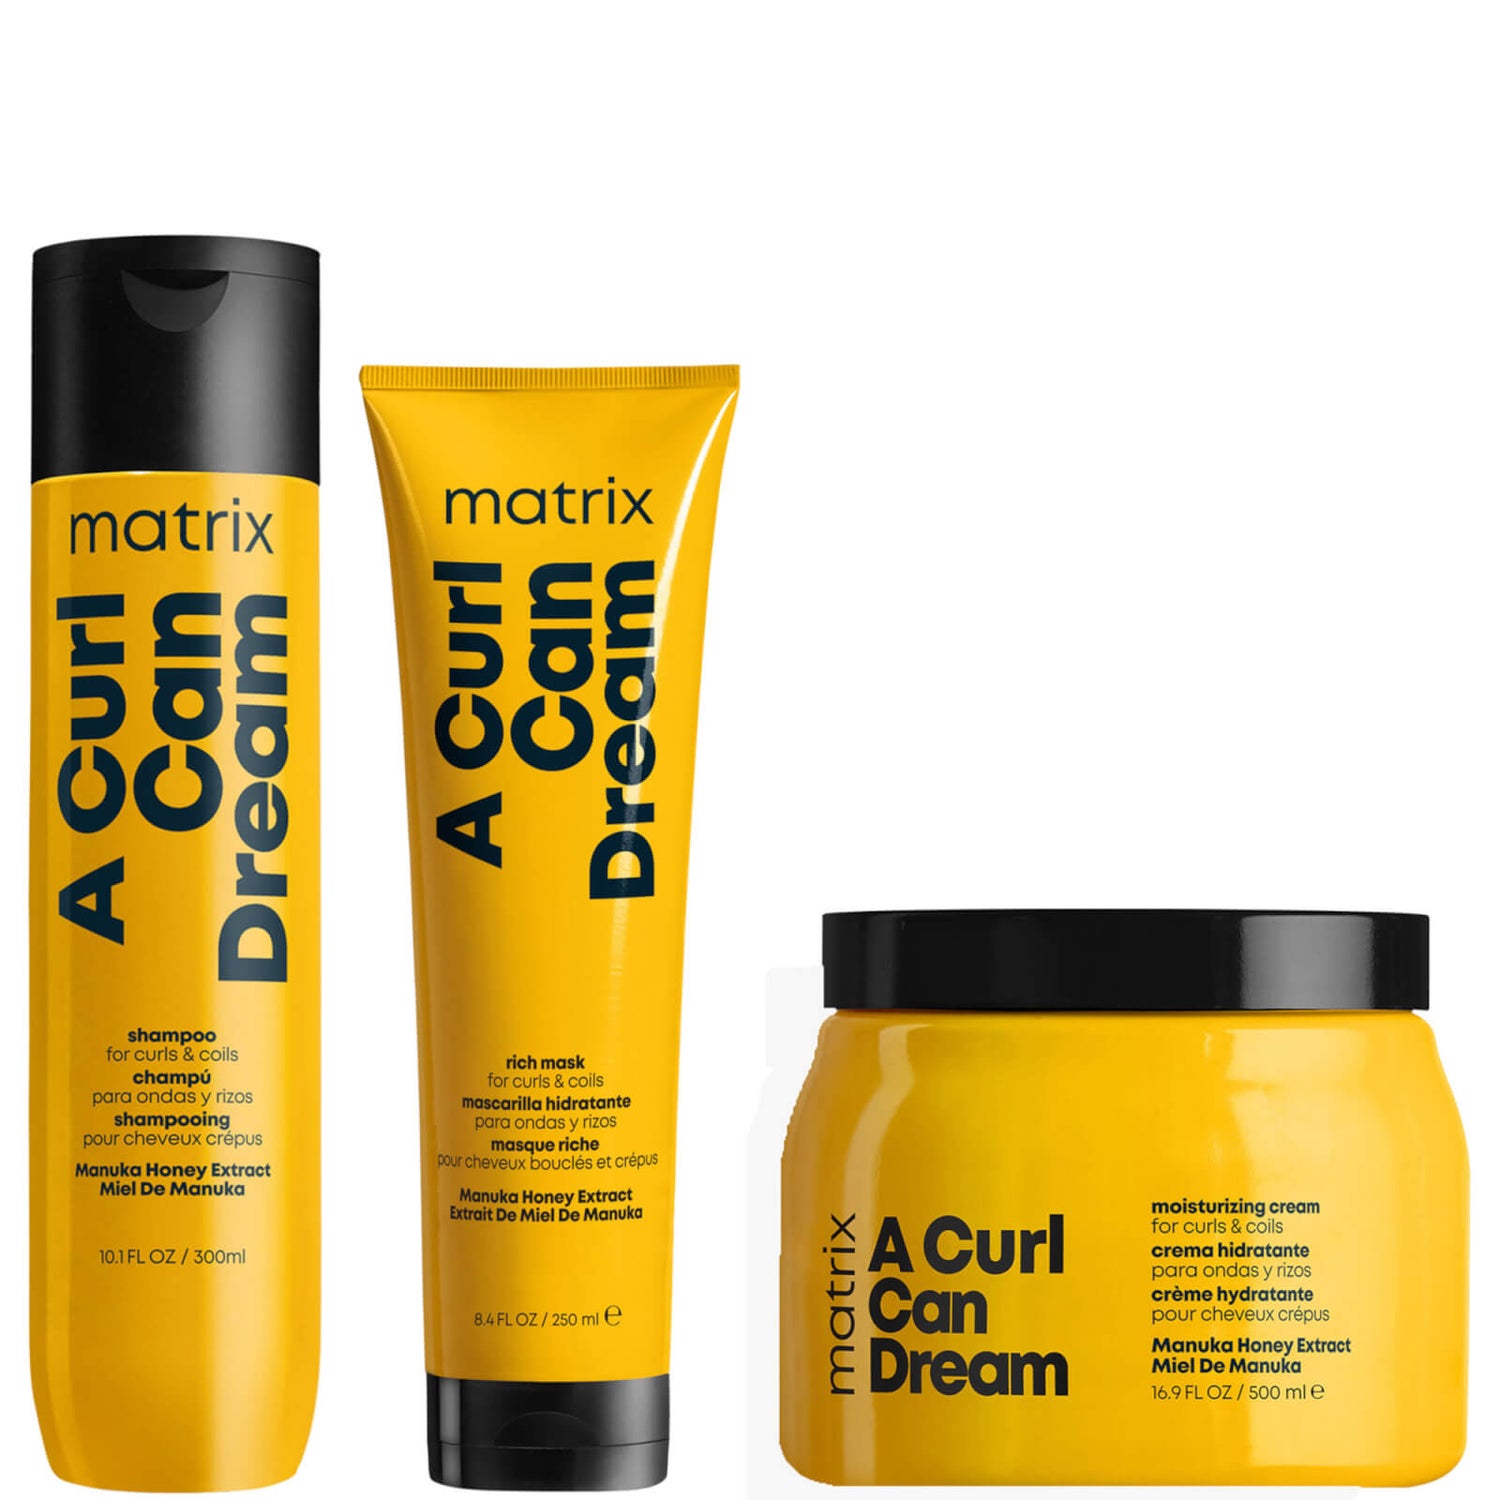 Matrix A Curl Can Dream Manuka Honey Infused Shampoo, Mask and Leave-in Cream Routine for Curls and Coils